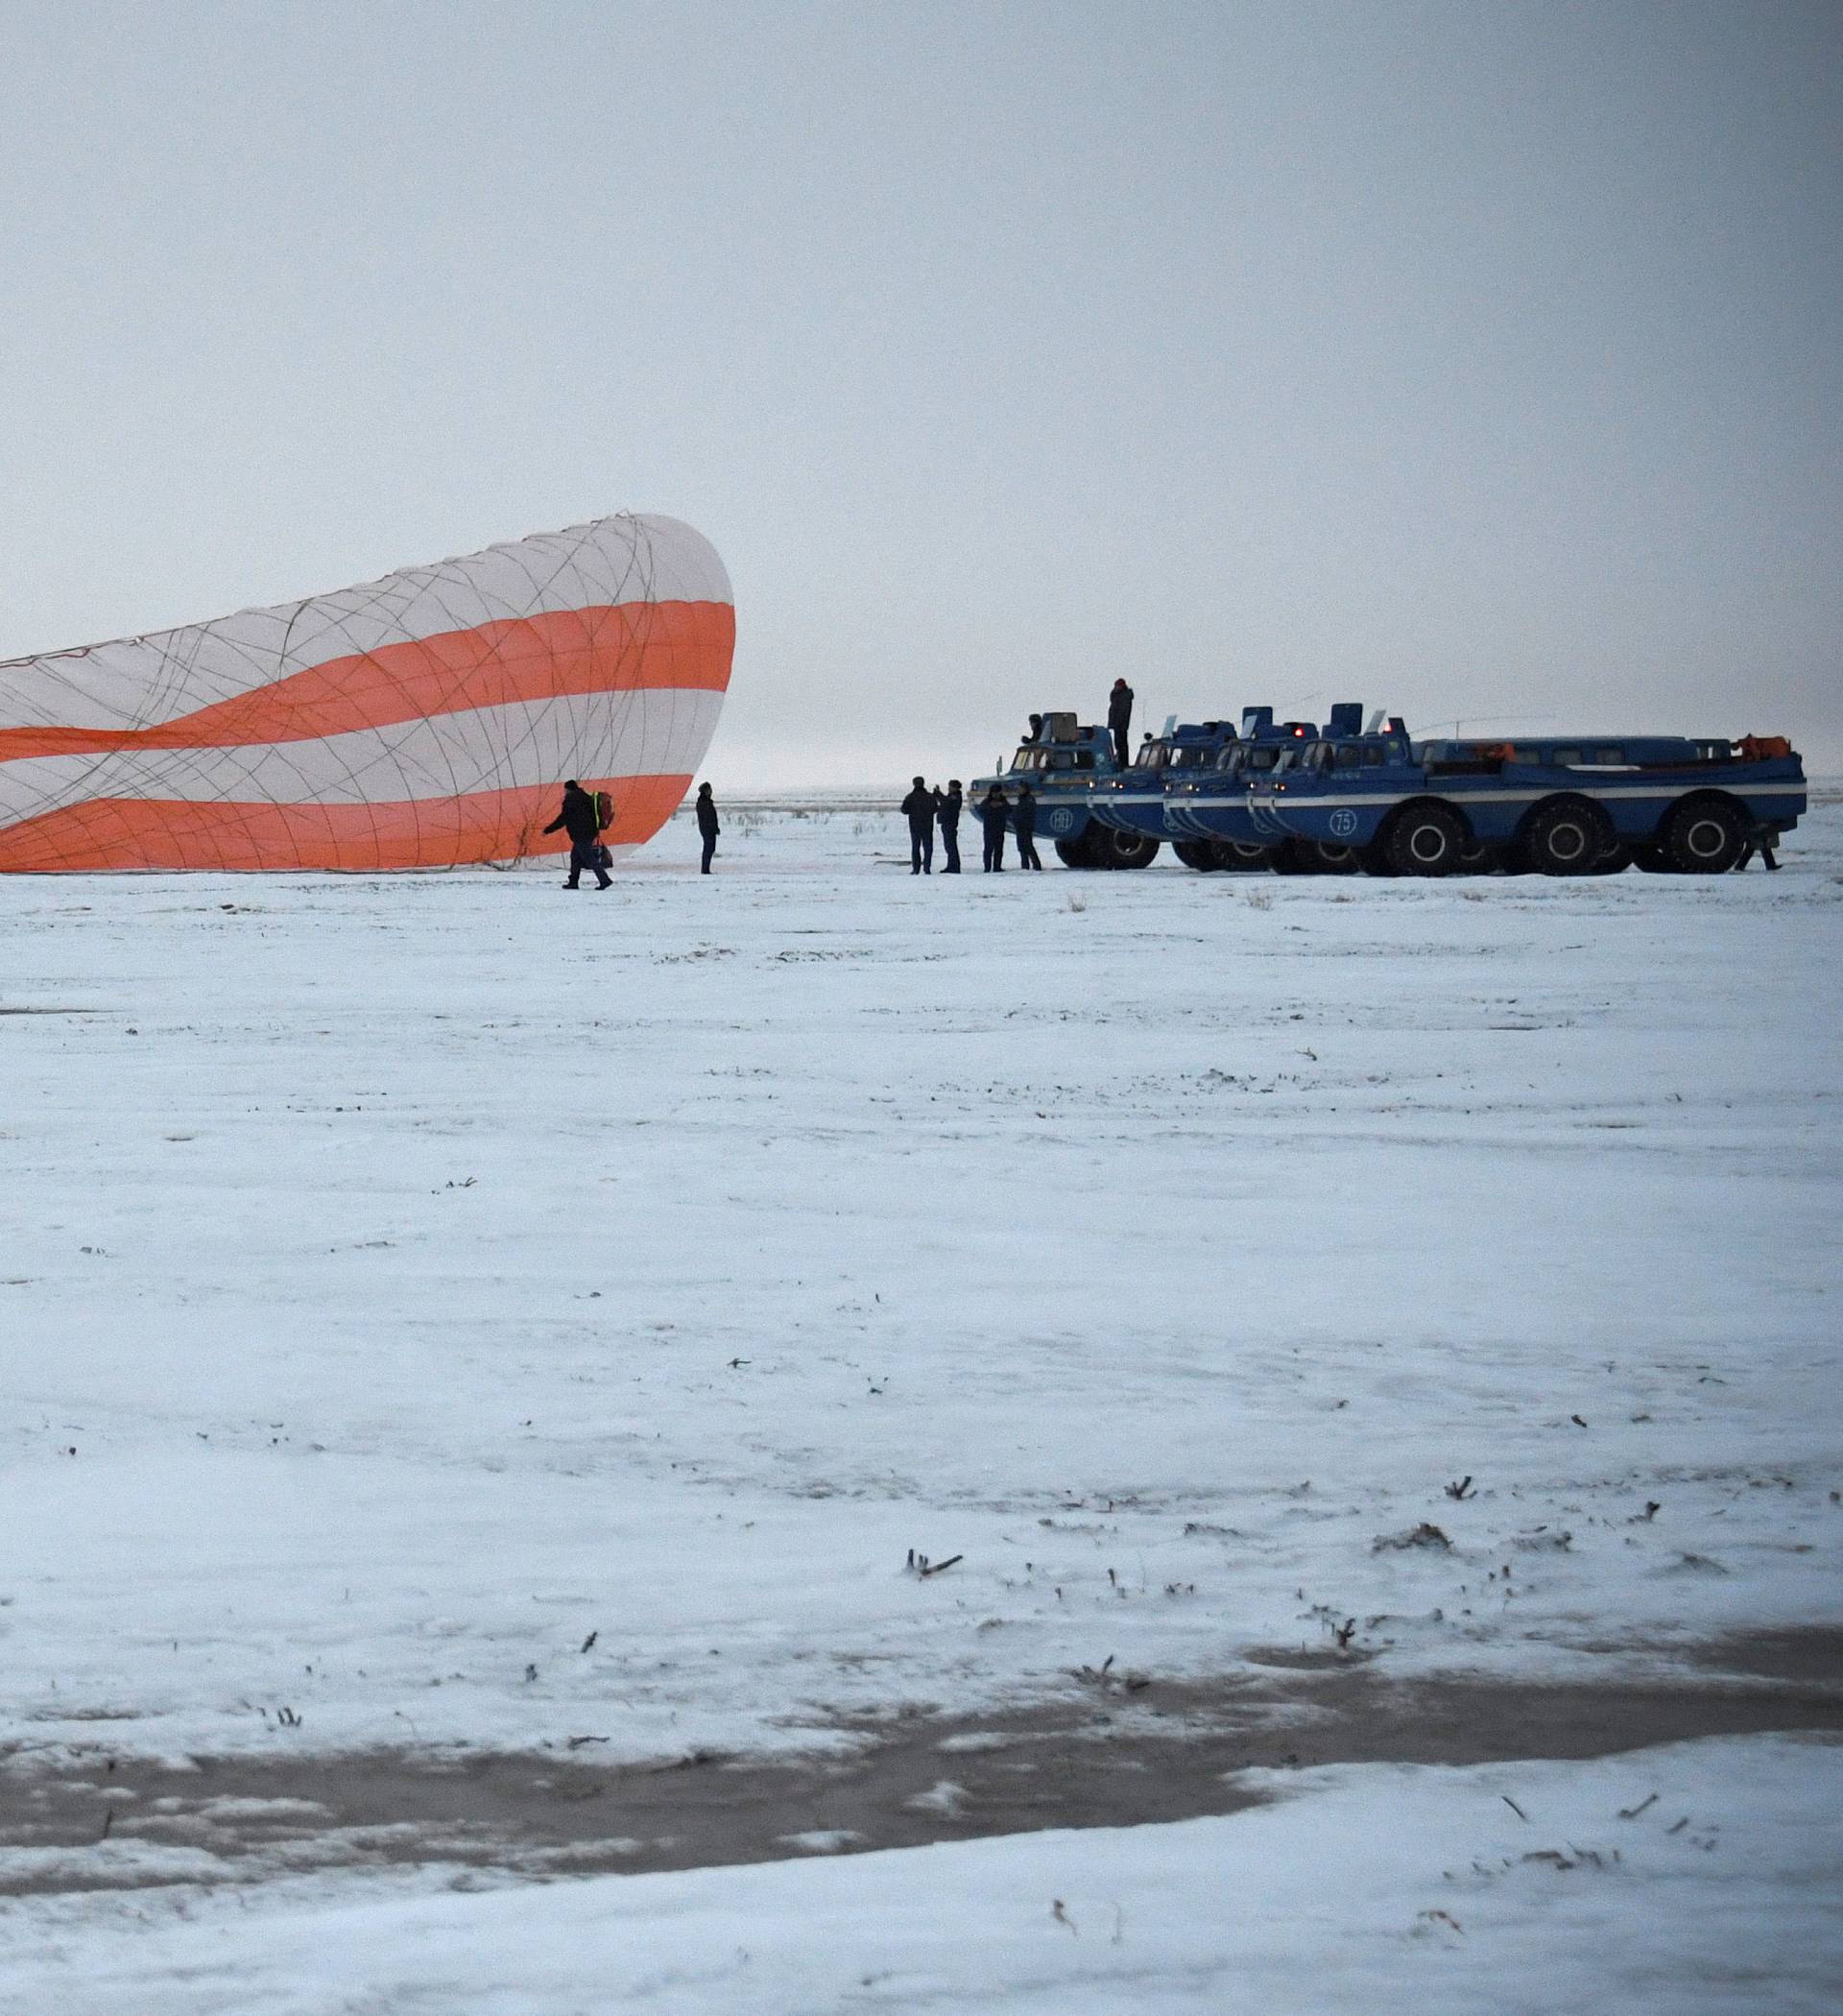 Search and rescue team works on the site of landing of the Soyuz MS-06 space capsule with International Space Station crew members Acaba and Vande Hei of the U.S., and Misurkin of Russia in a remote area outside the town of Dzhezkazgan